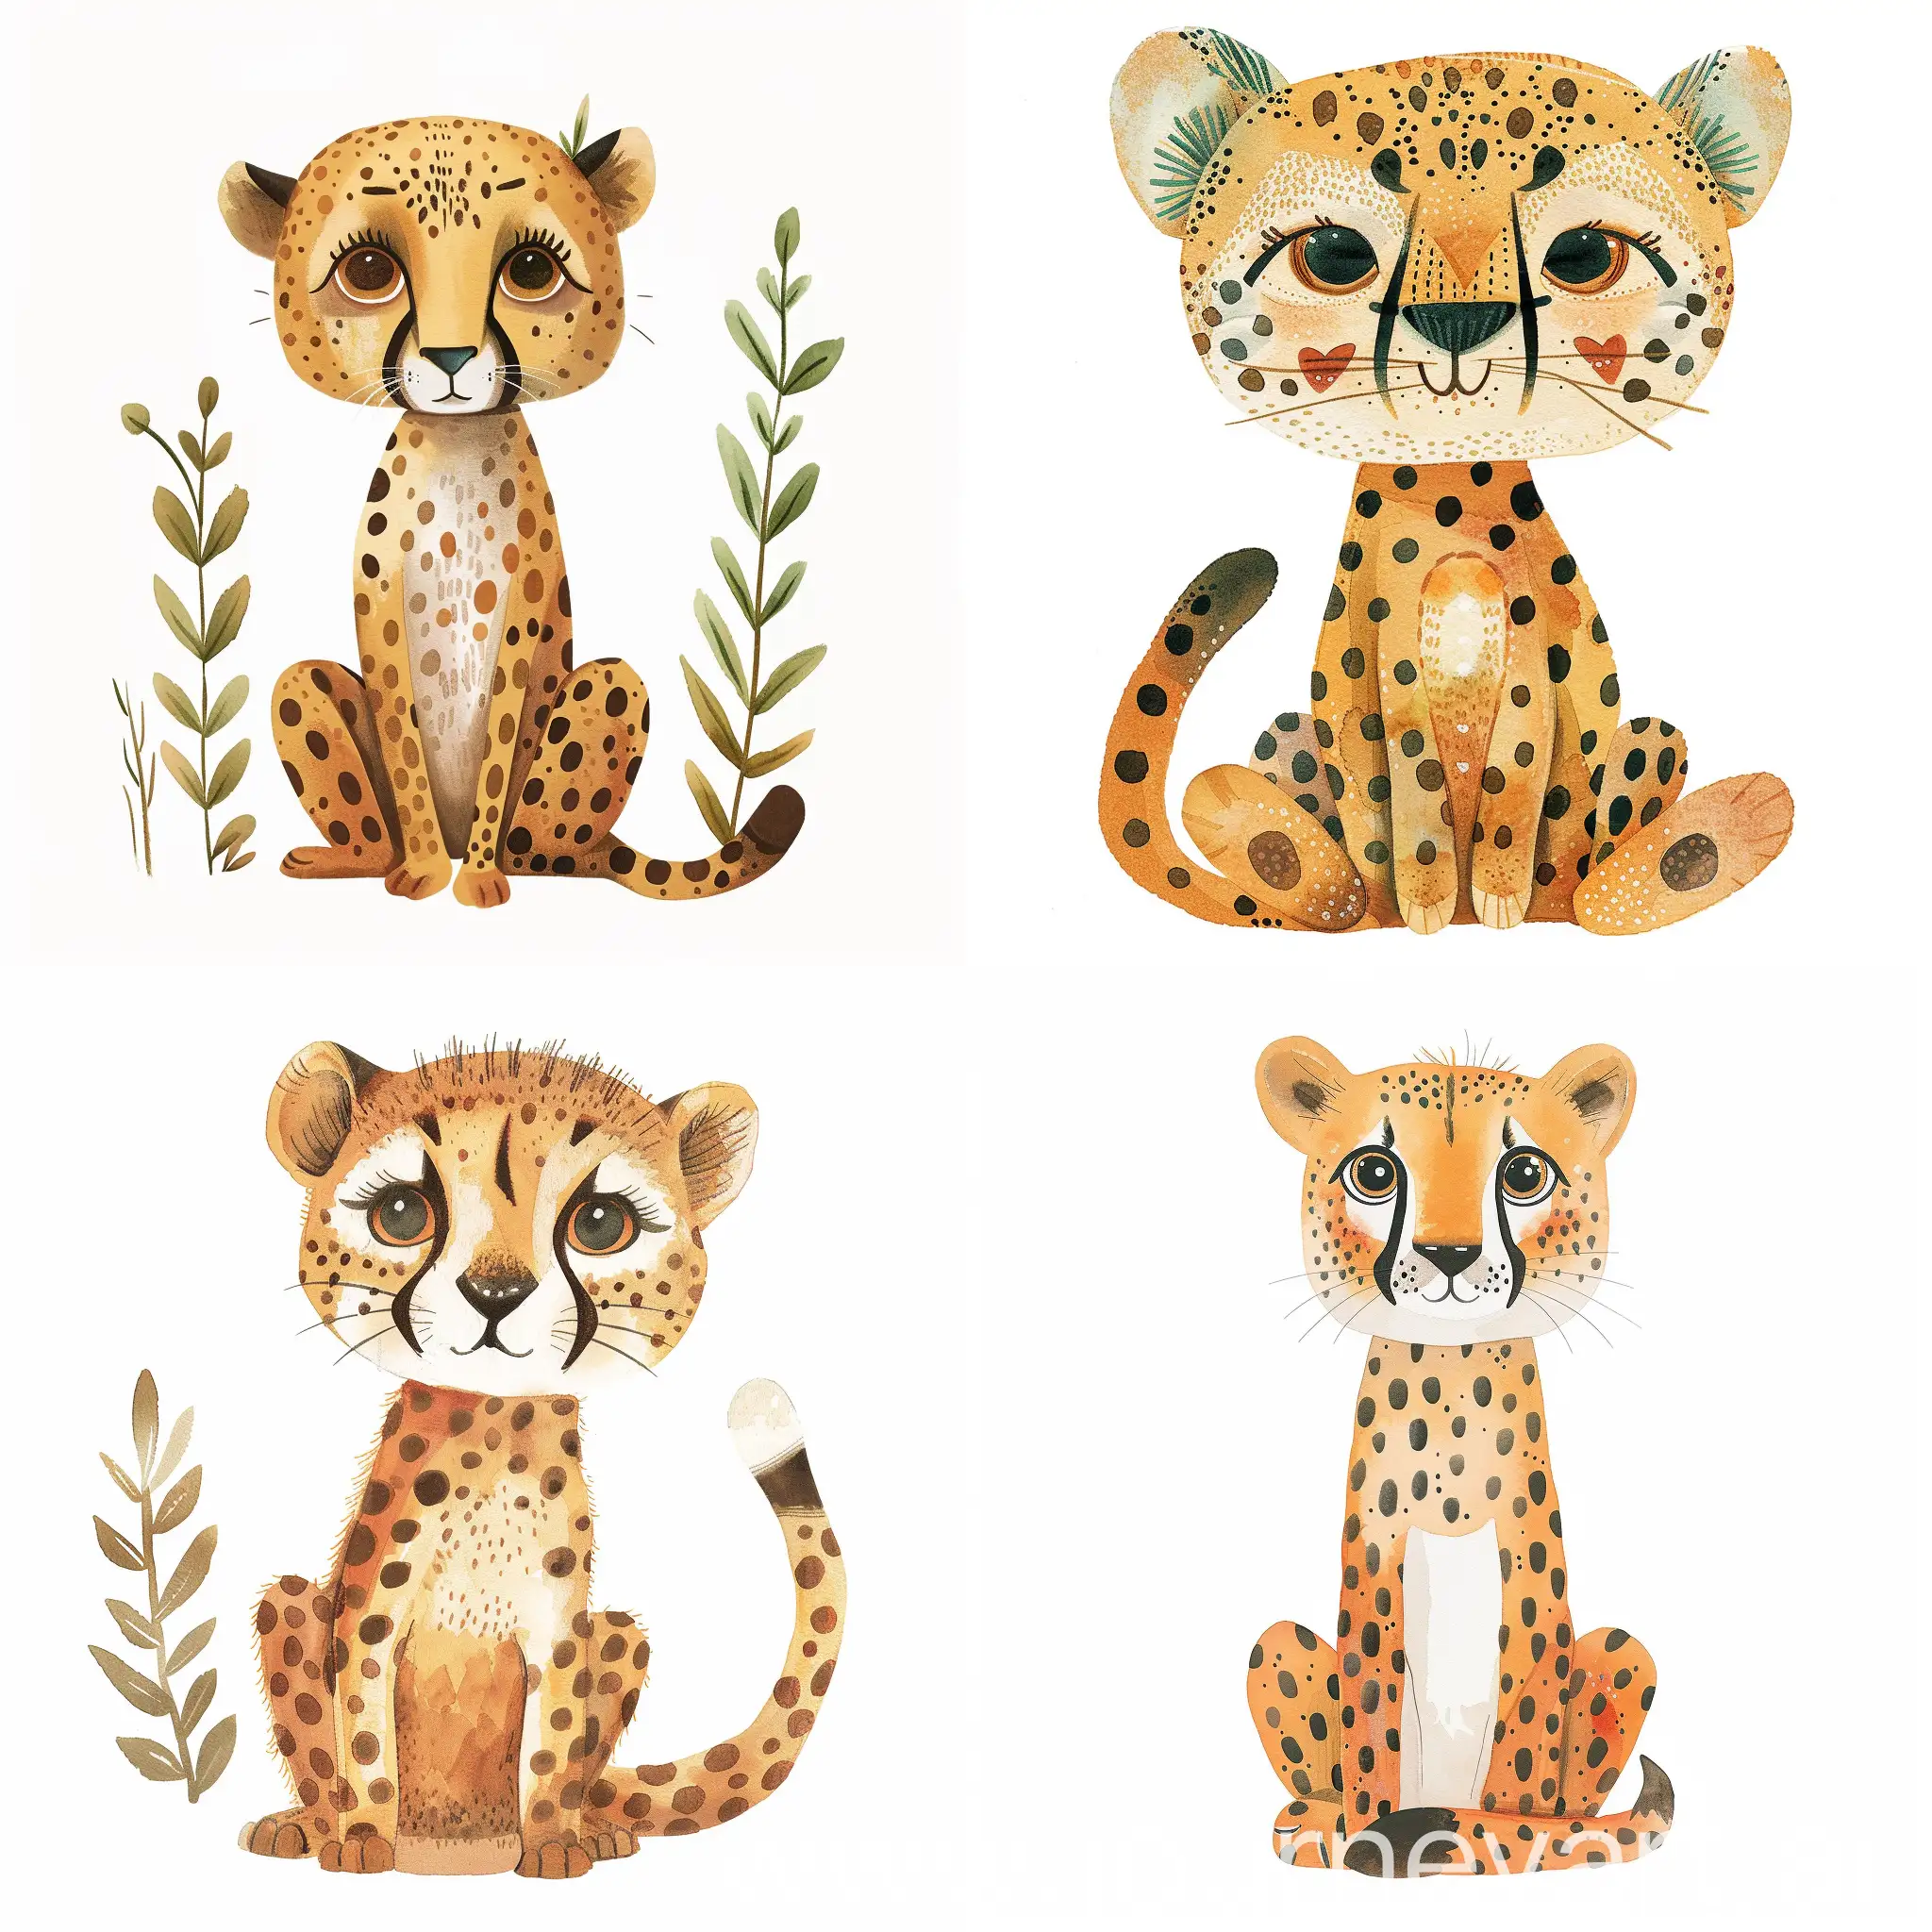 very cute [ kawaii Cheetah ] clipart, organic forms, in the style of collaboration by Jon Klassen and Oliver Jeffers desaturated light and airy pastel color palette, nursery art, white background